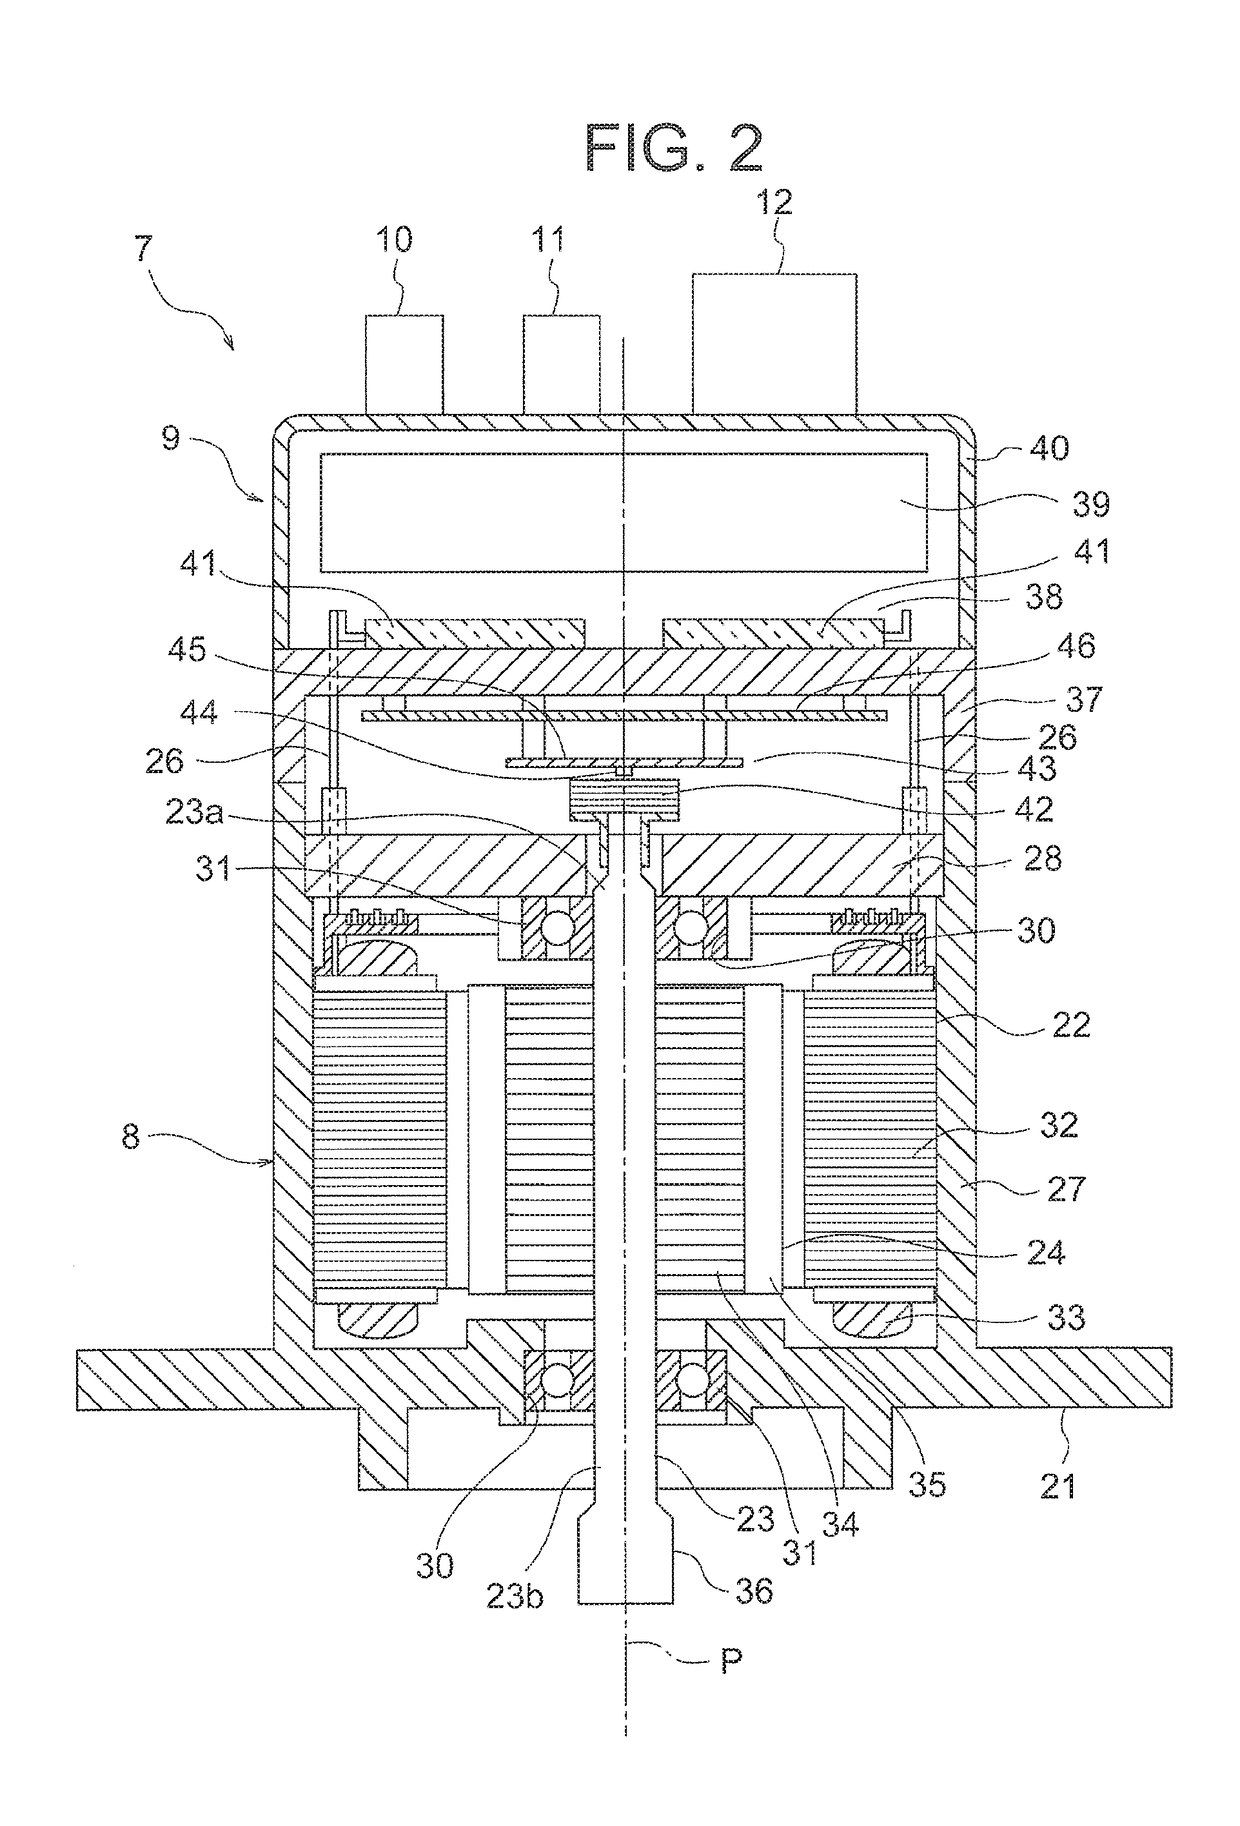 Electric driving apparatus